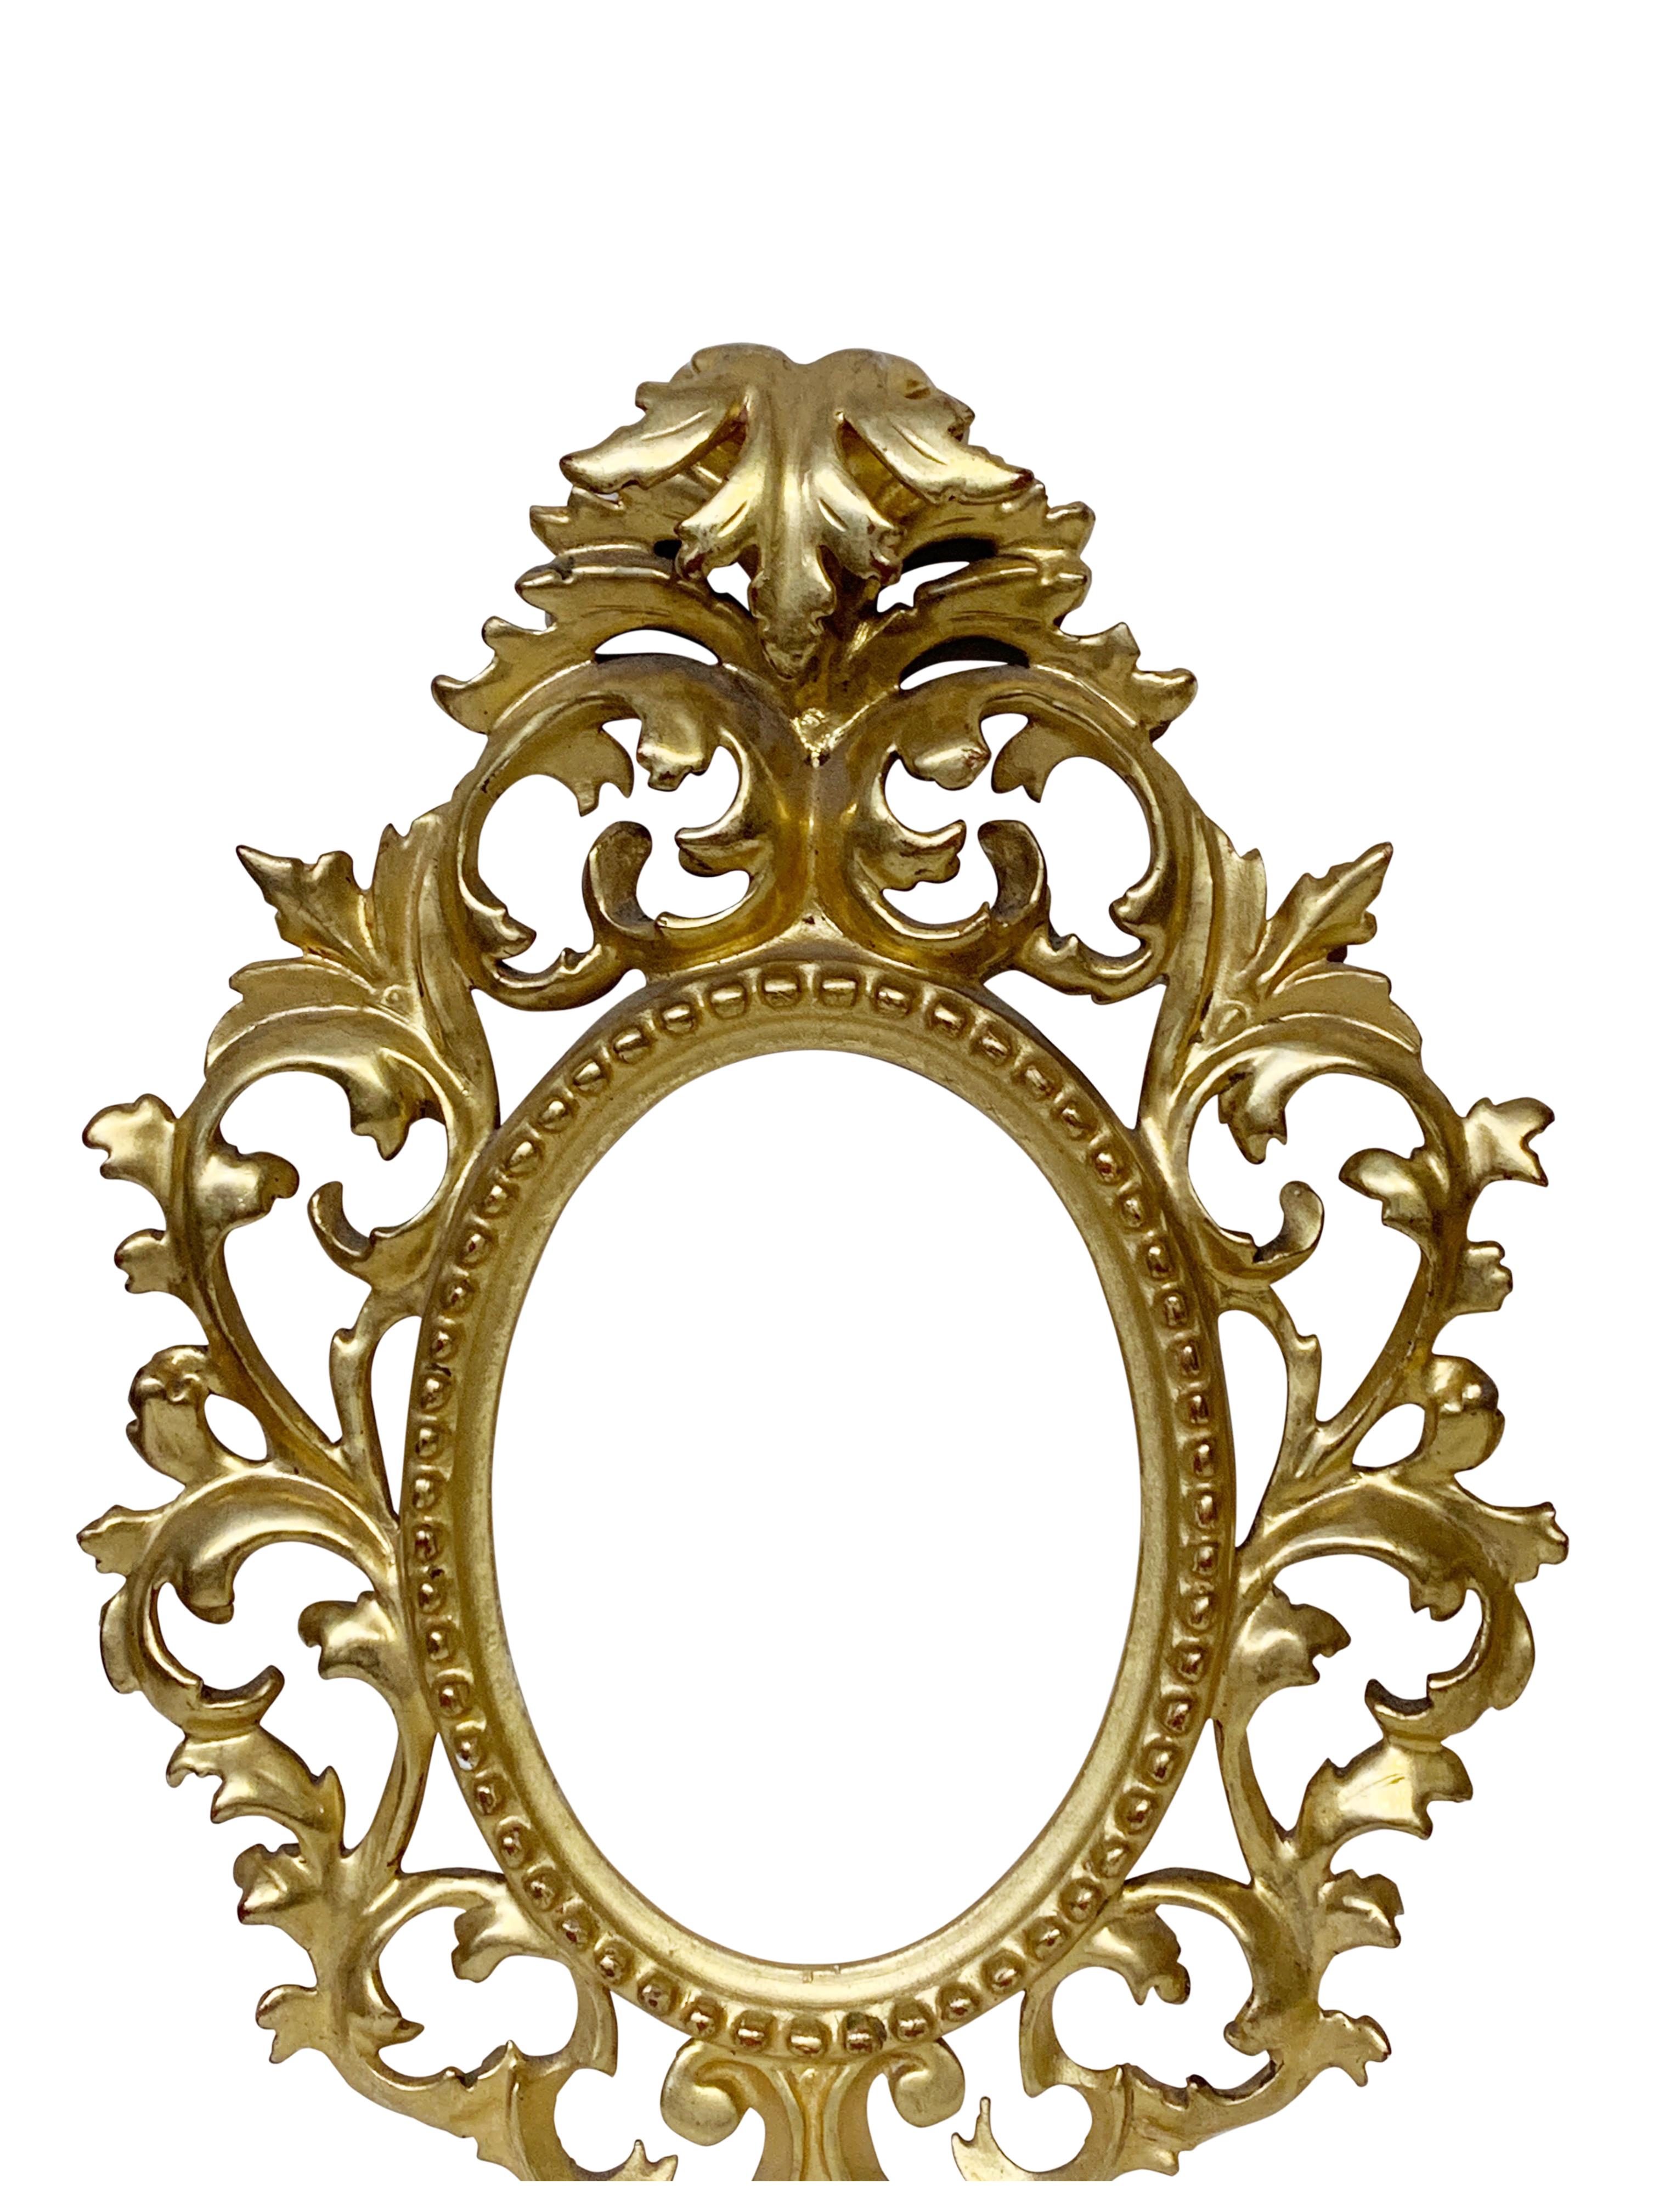 Rare pair of Venetian carved and gold leaf frames for oval porcelain plaques/ Net size is approximately 4